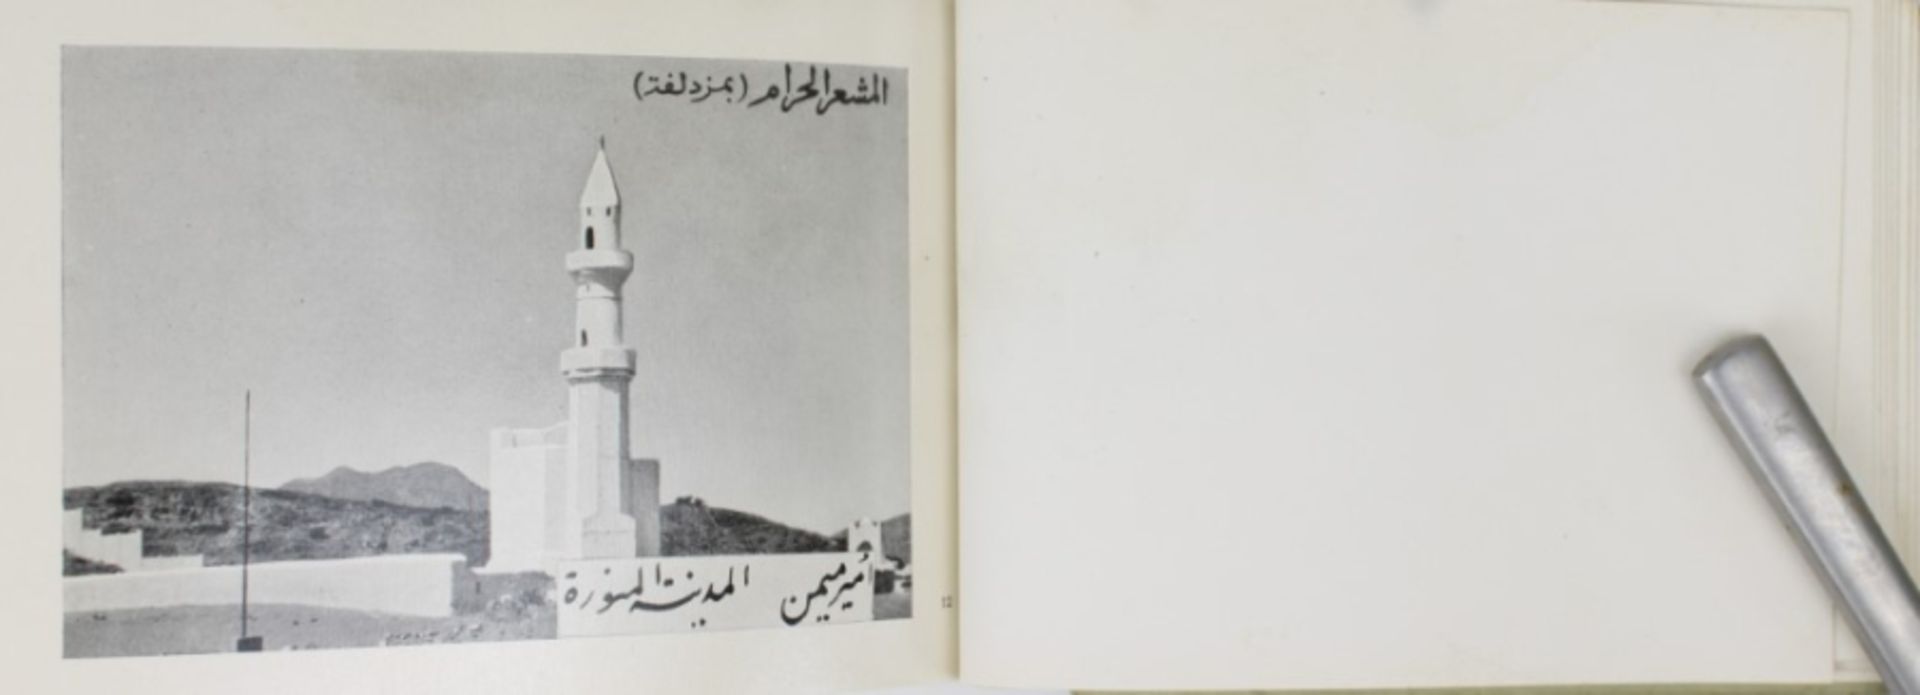 1930 Album with photographs of Mecca - Image 4 of 24